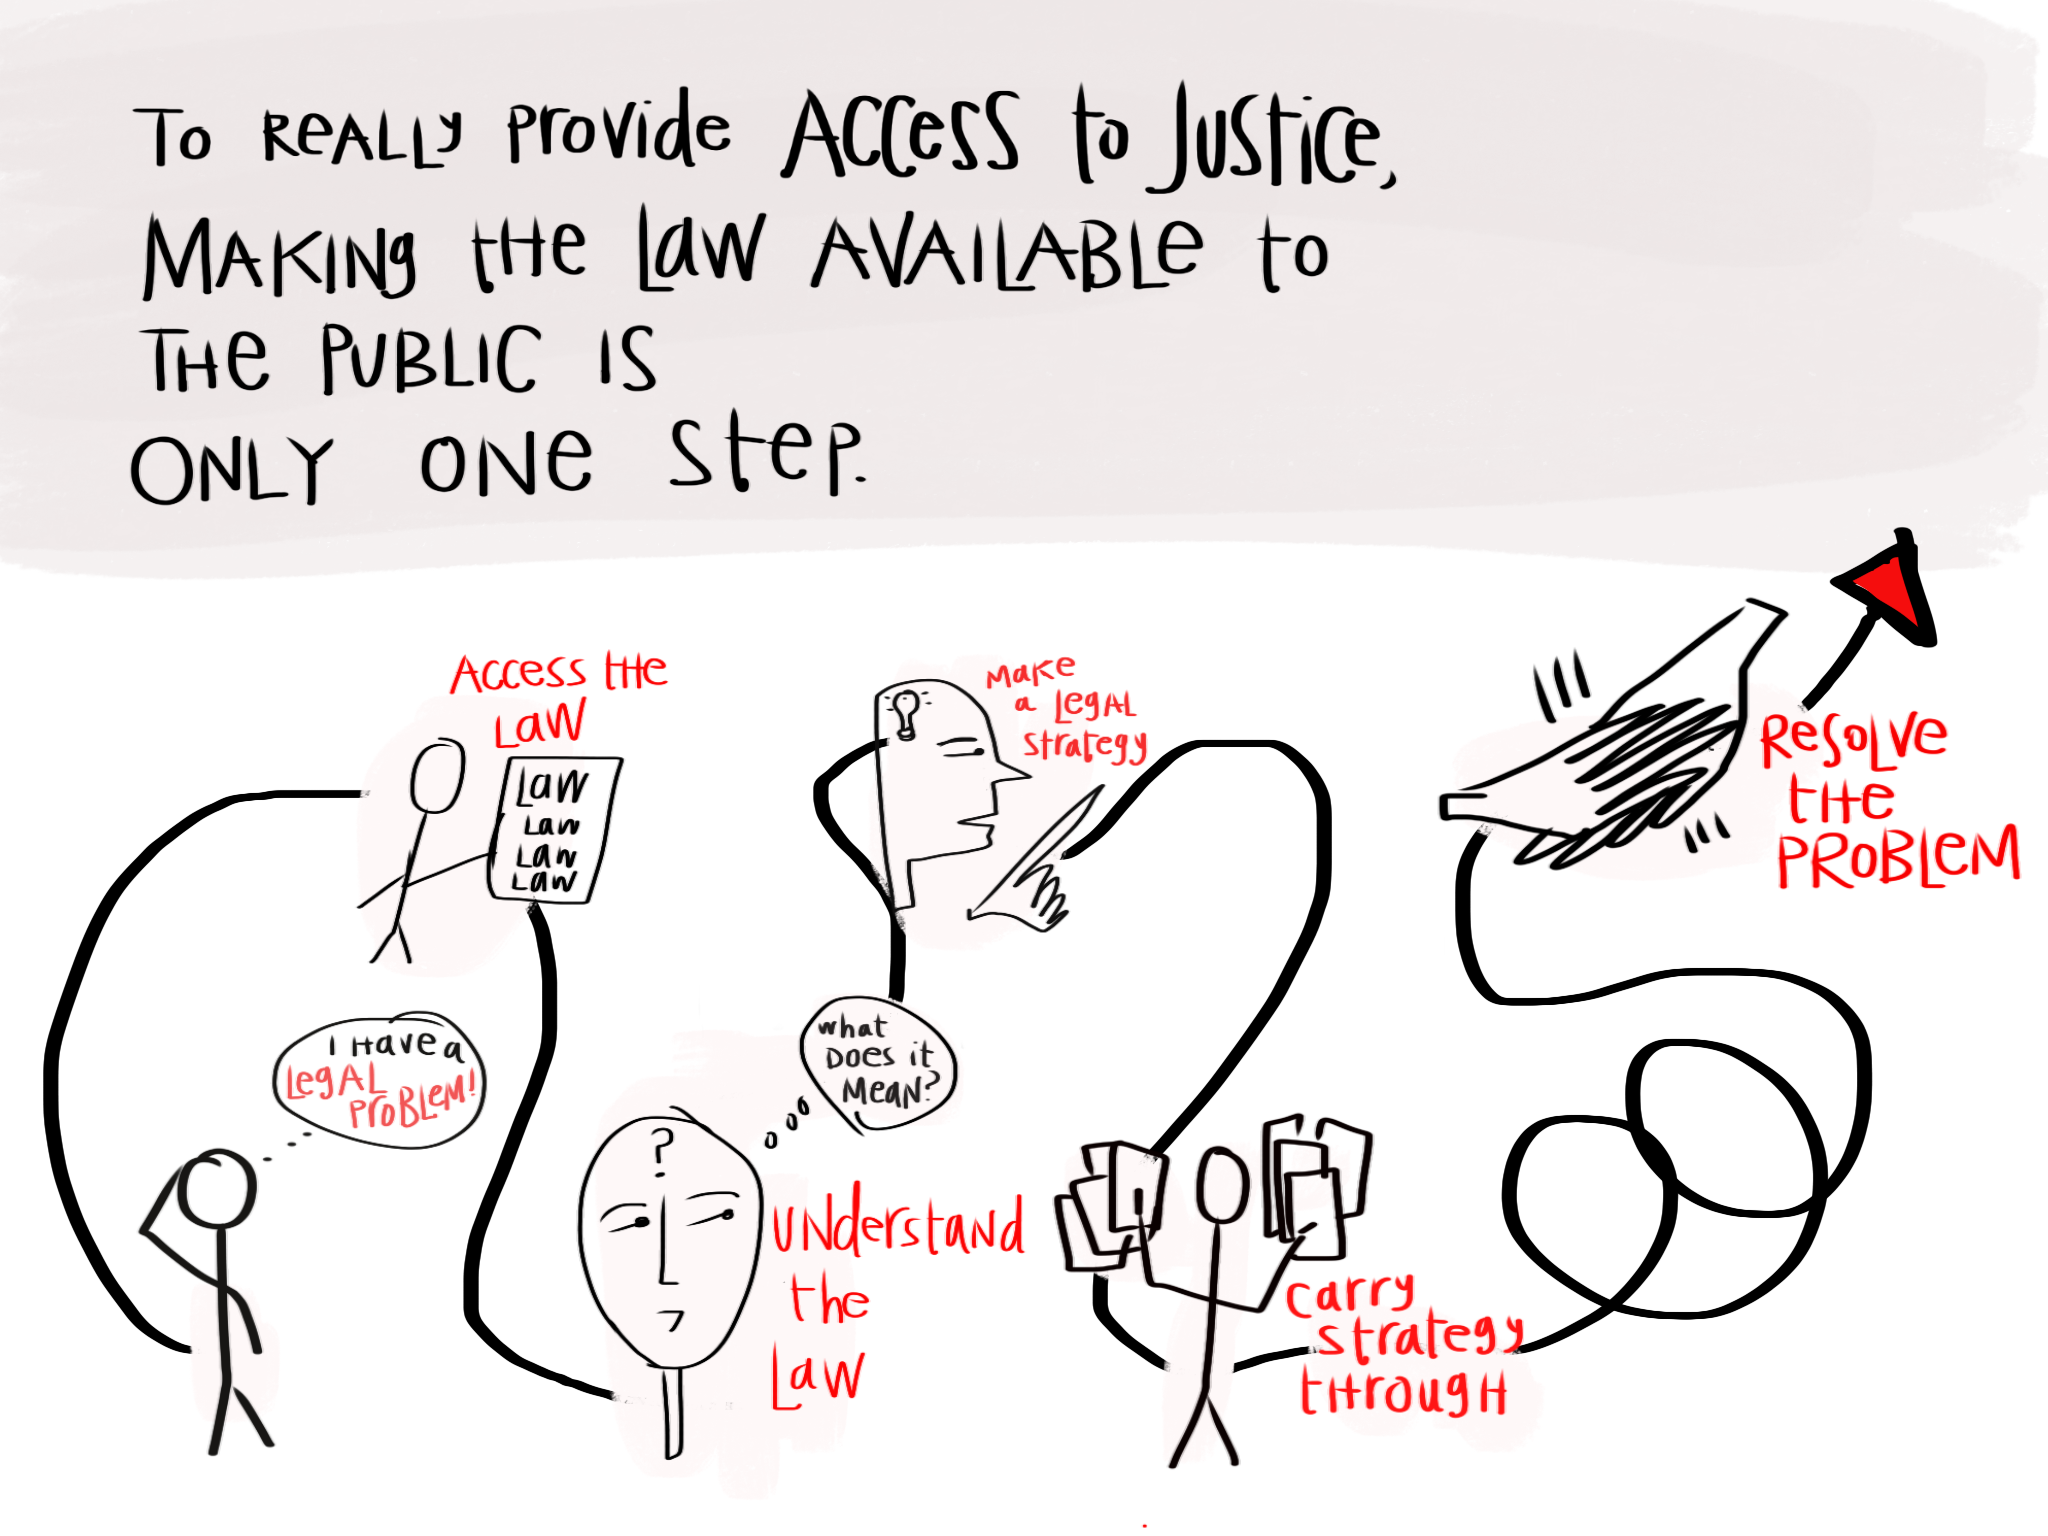 Access to Justice Design Process